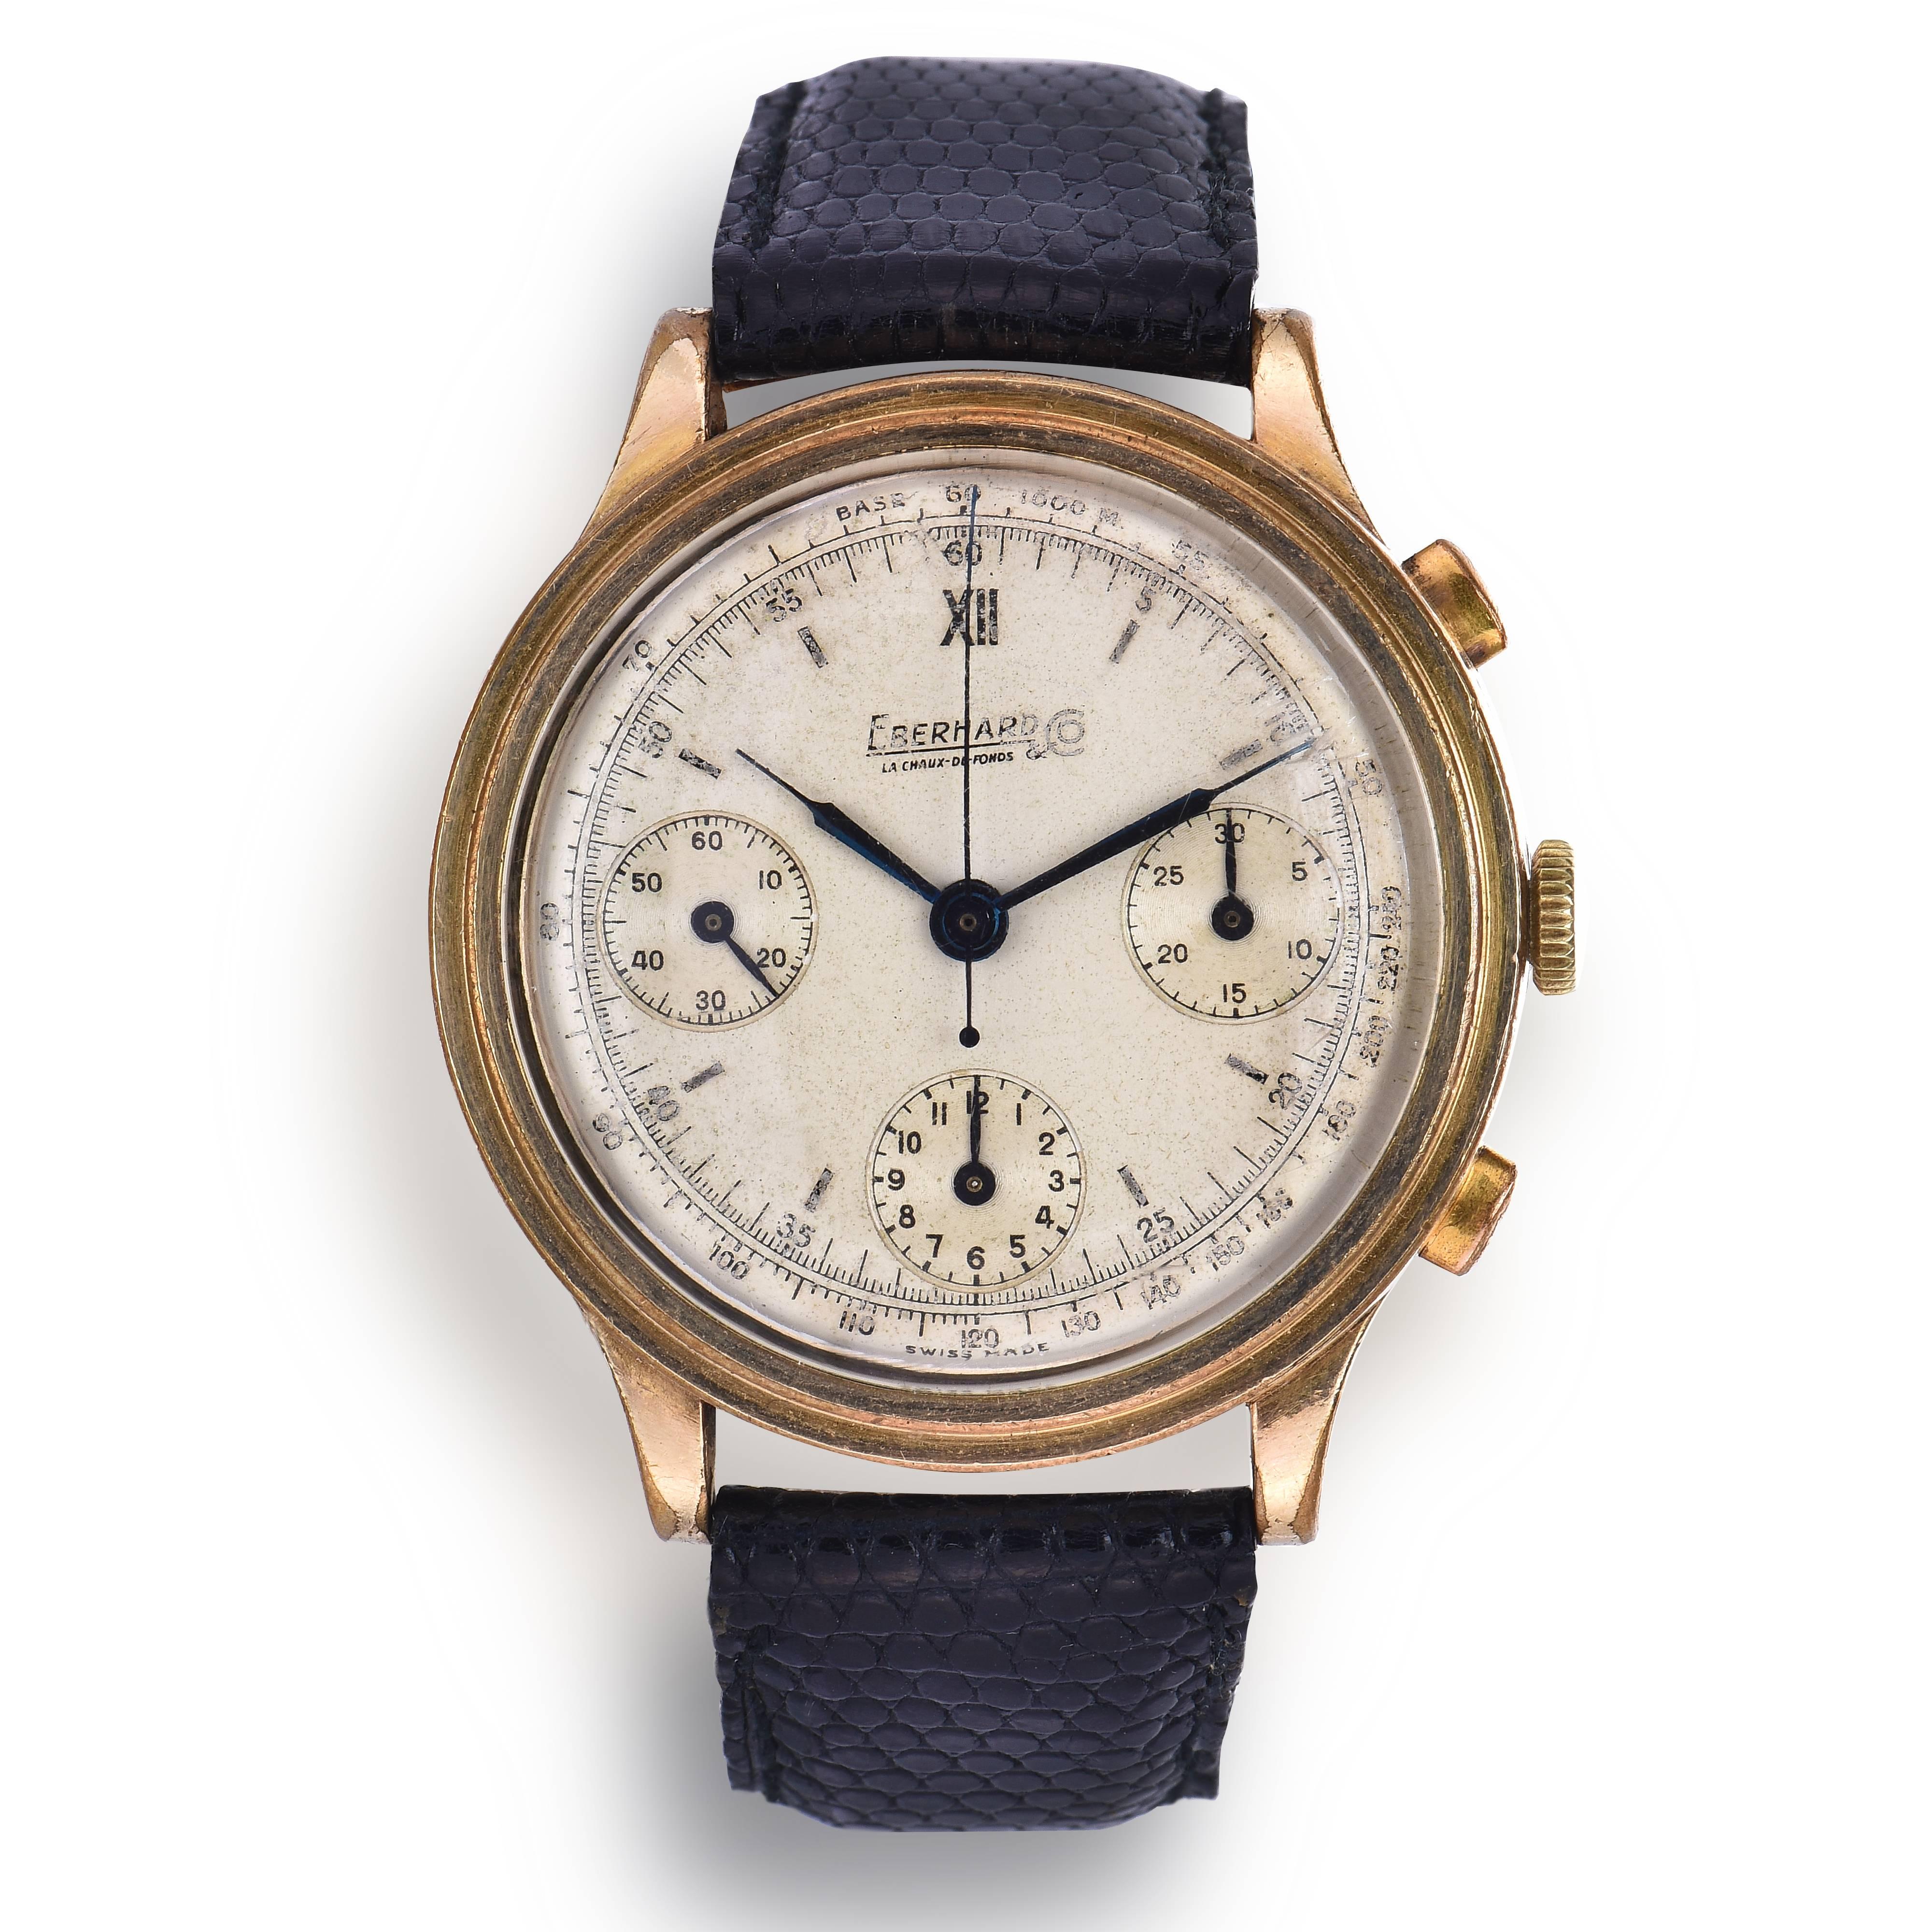 Eberhard & Co Chronograph Watch
Solid 18K Yellow Gold Case with 20 Micron Electroplated Case back
Manual Wind Movement
Silvered Three Register Dial with Patina and Blue Hands
Flyback Chronograph Function
Bottom Button in Chronograph Slides Up